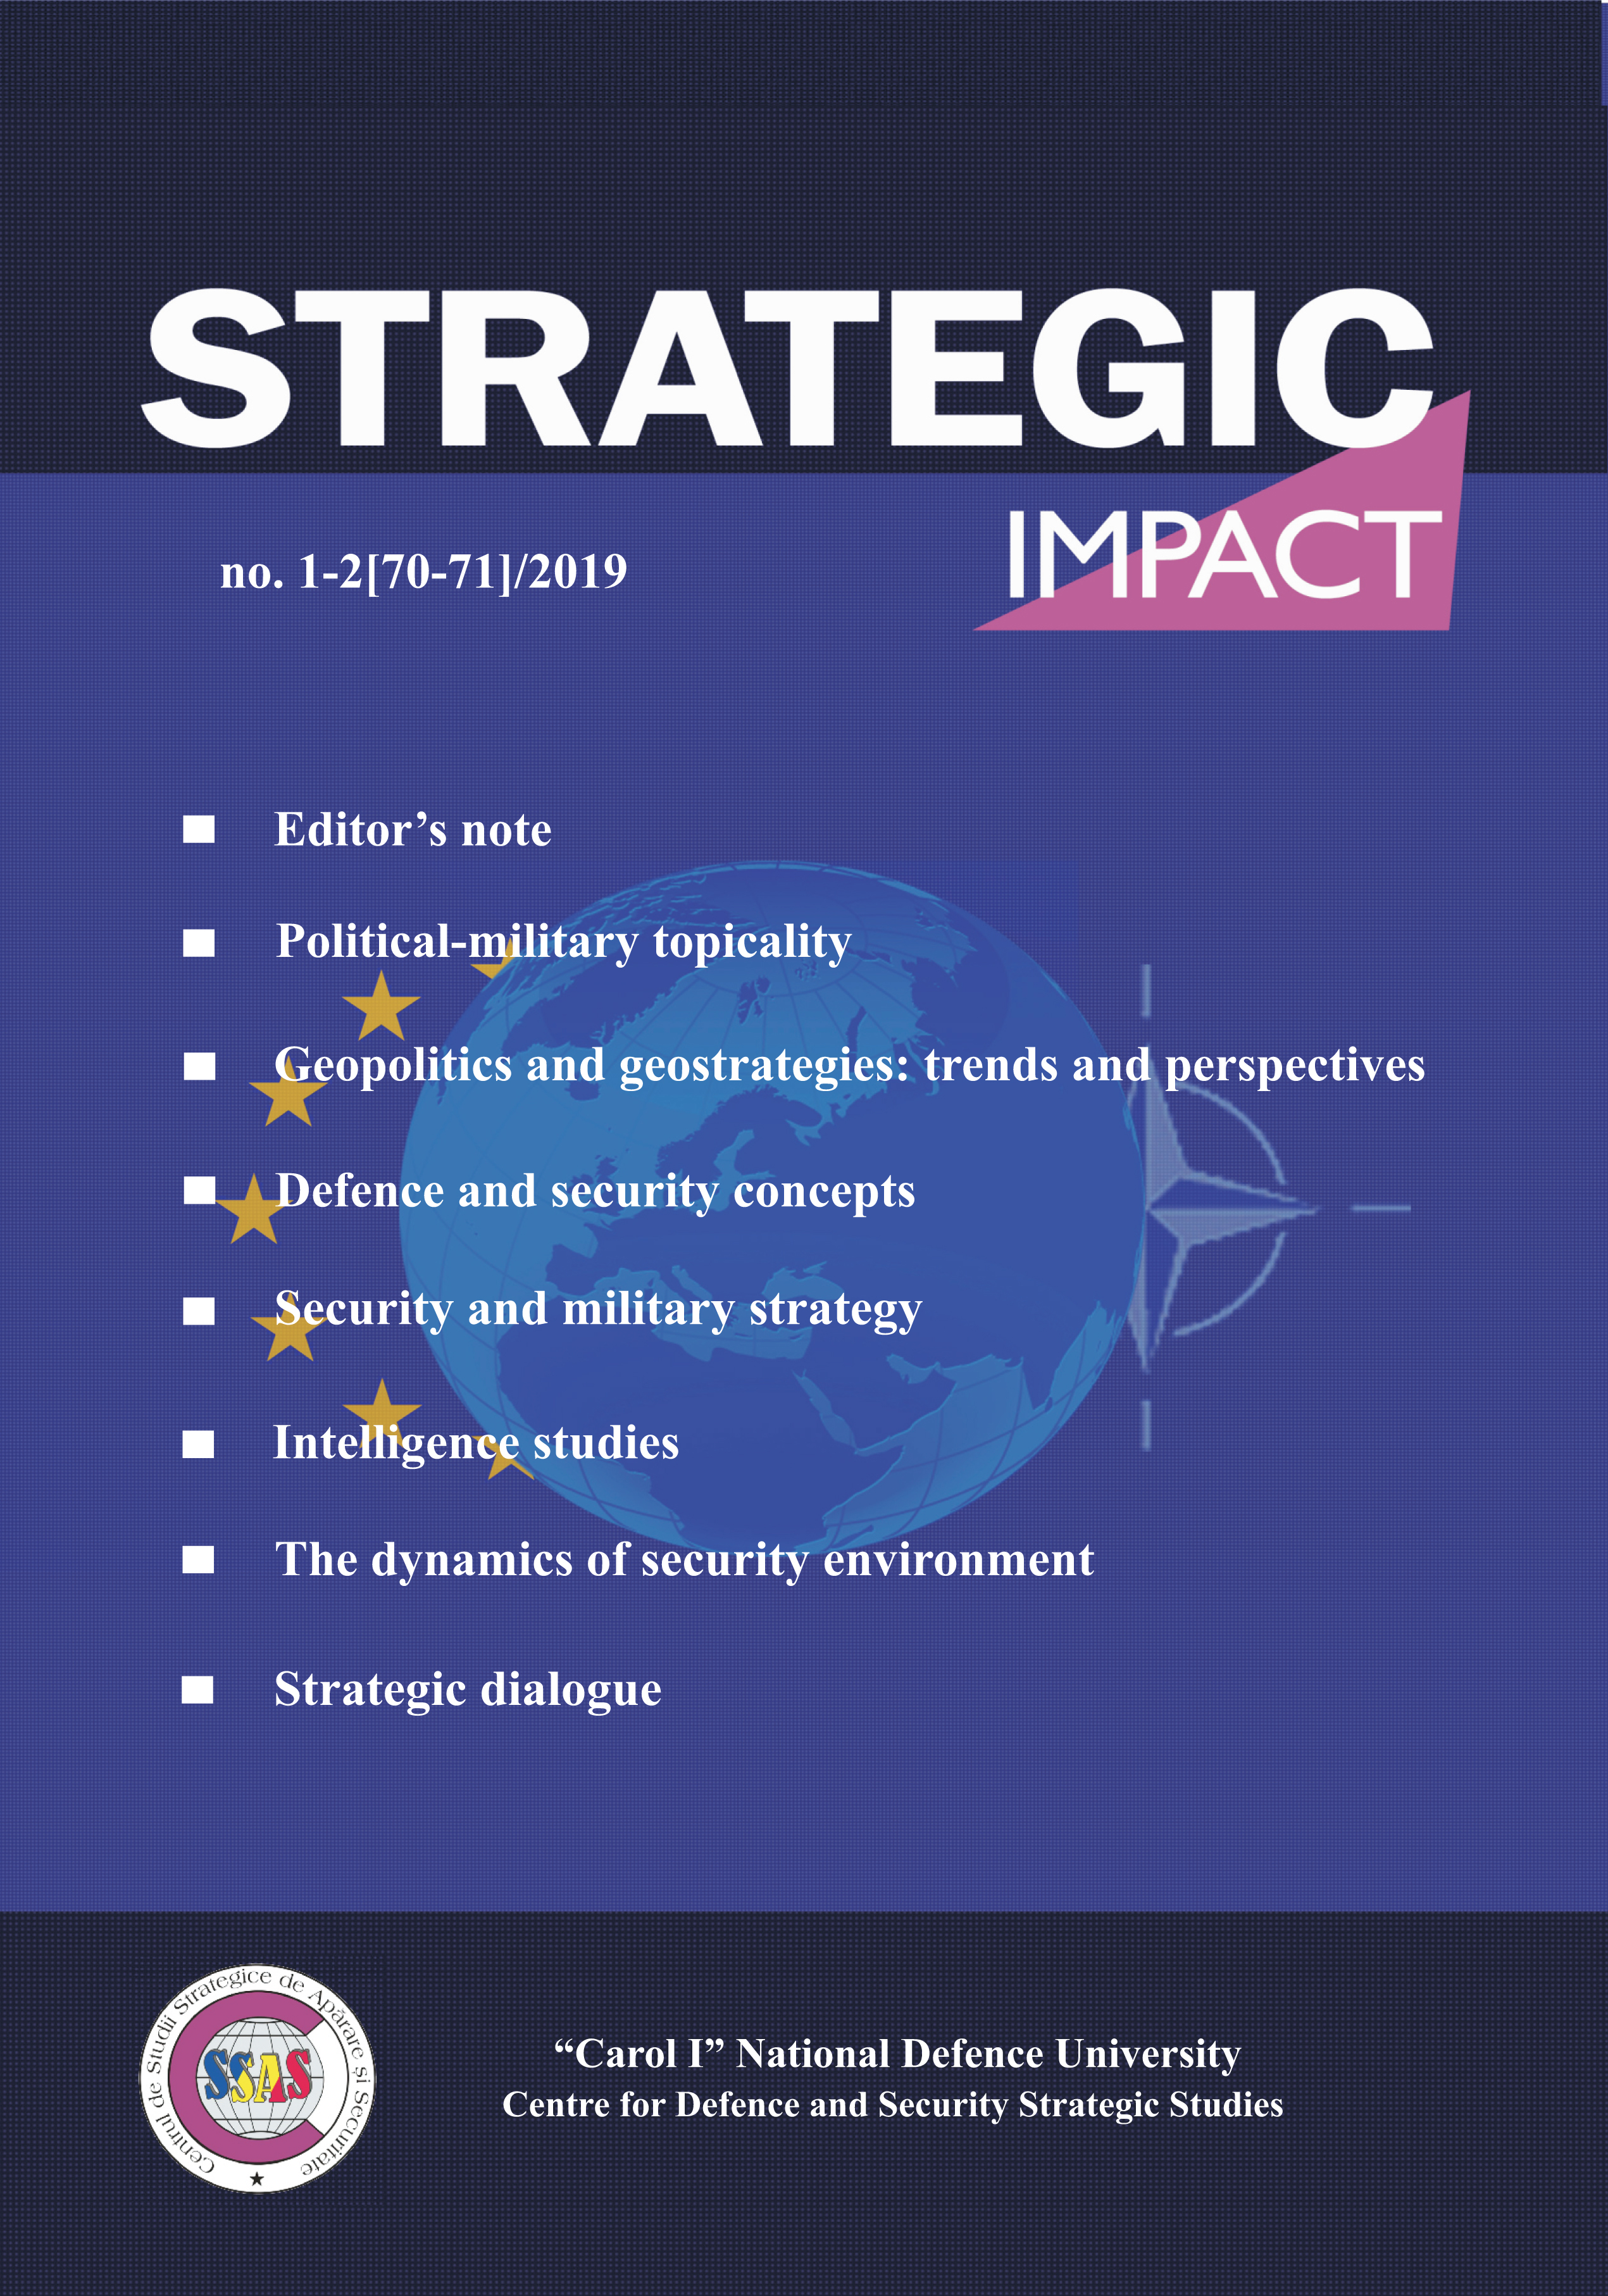 THE COURSE OF CHALLENGES ON THE EUROPEAN SECURITY Cover Image